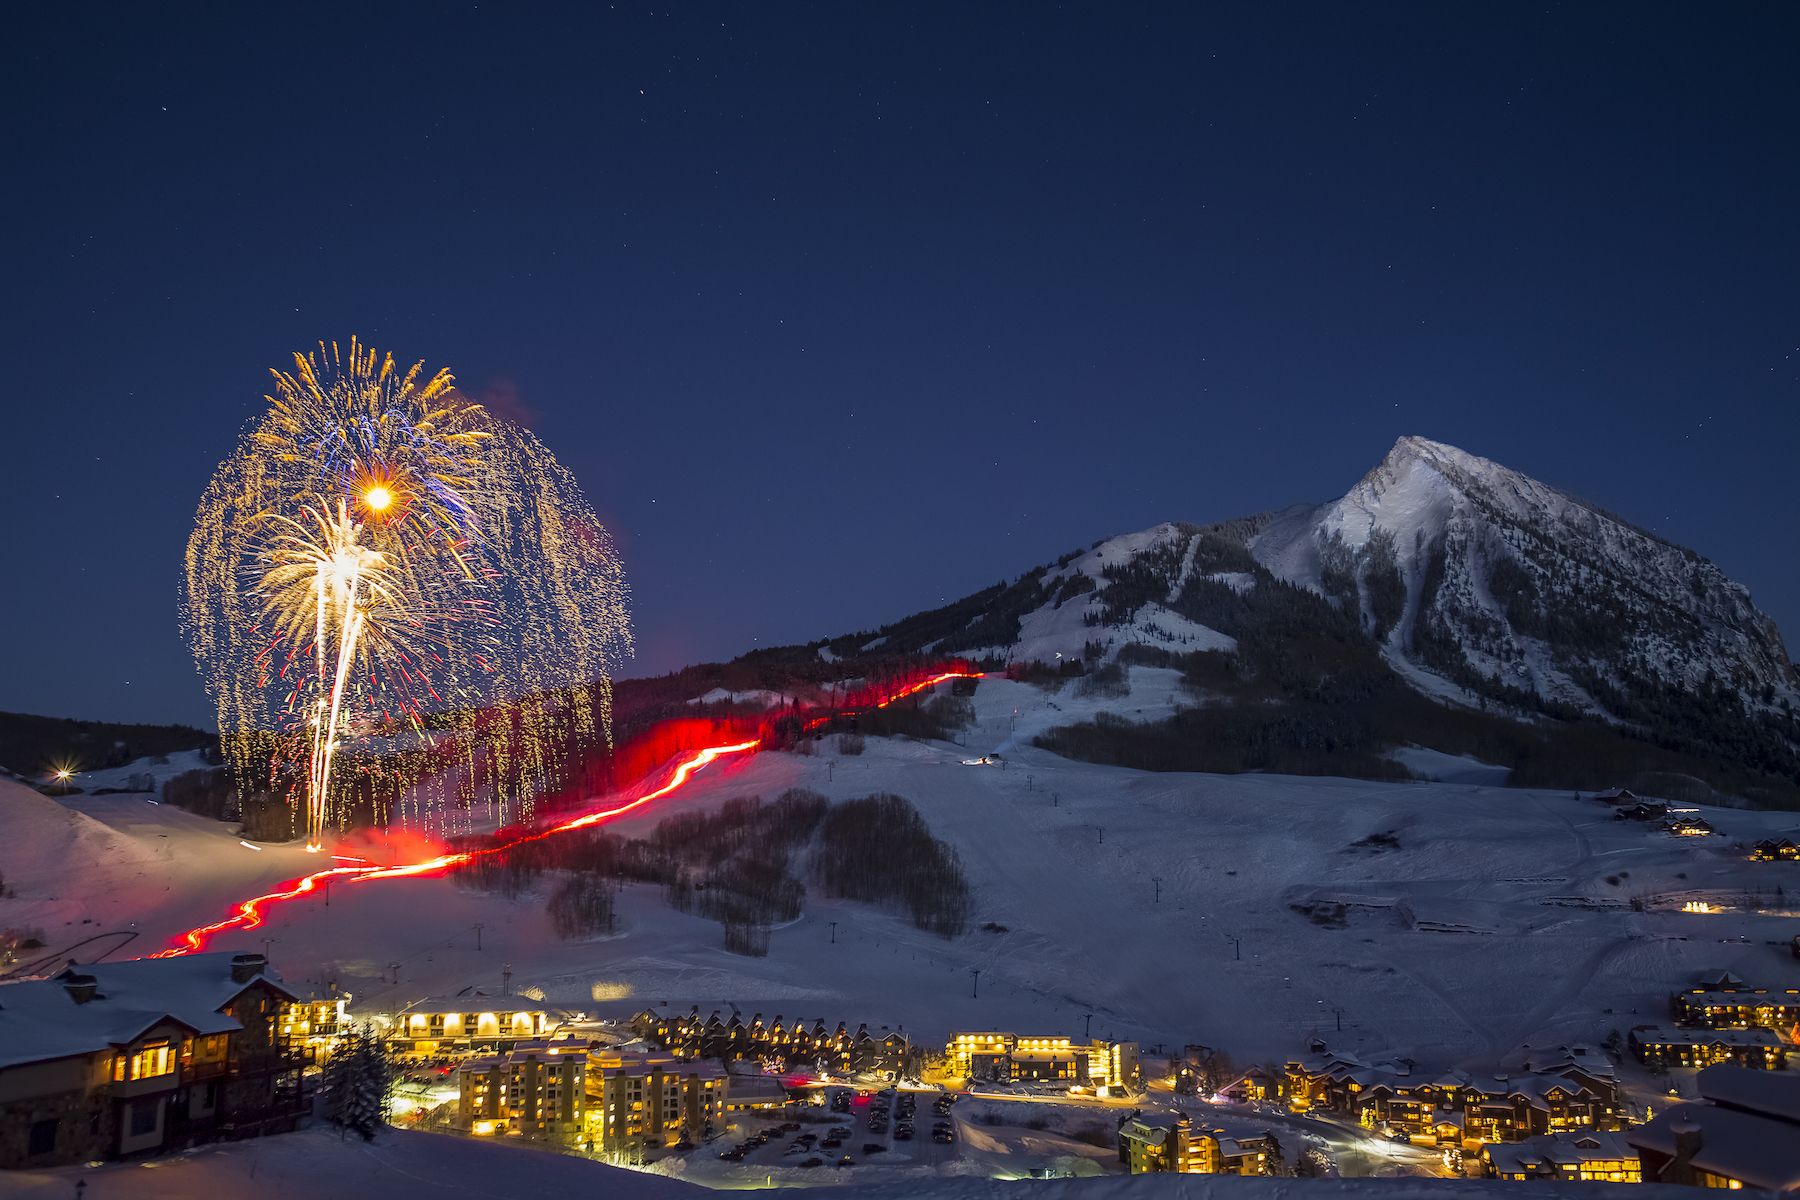 Skies skiing down a ski run while holding torches to create a line going down the mountain for the torchlight parade in Mt. Crested Butte